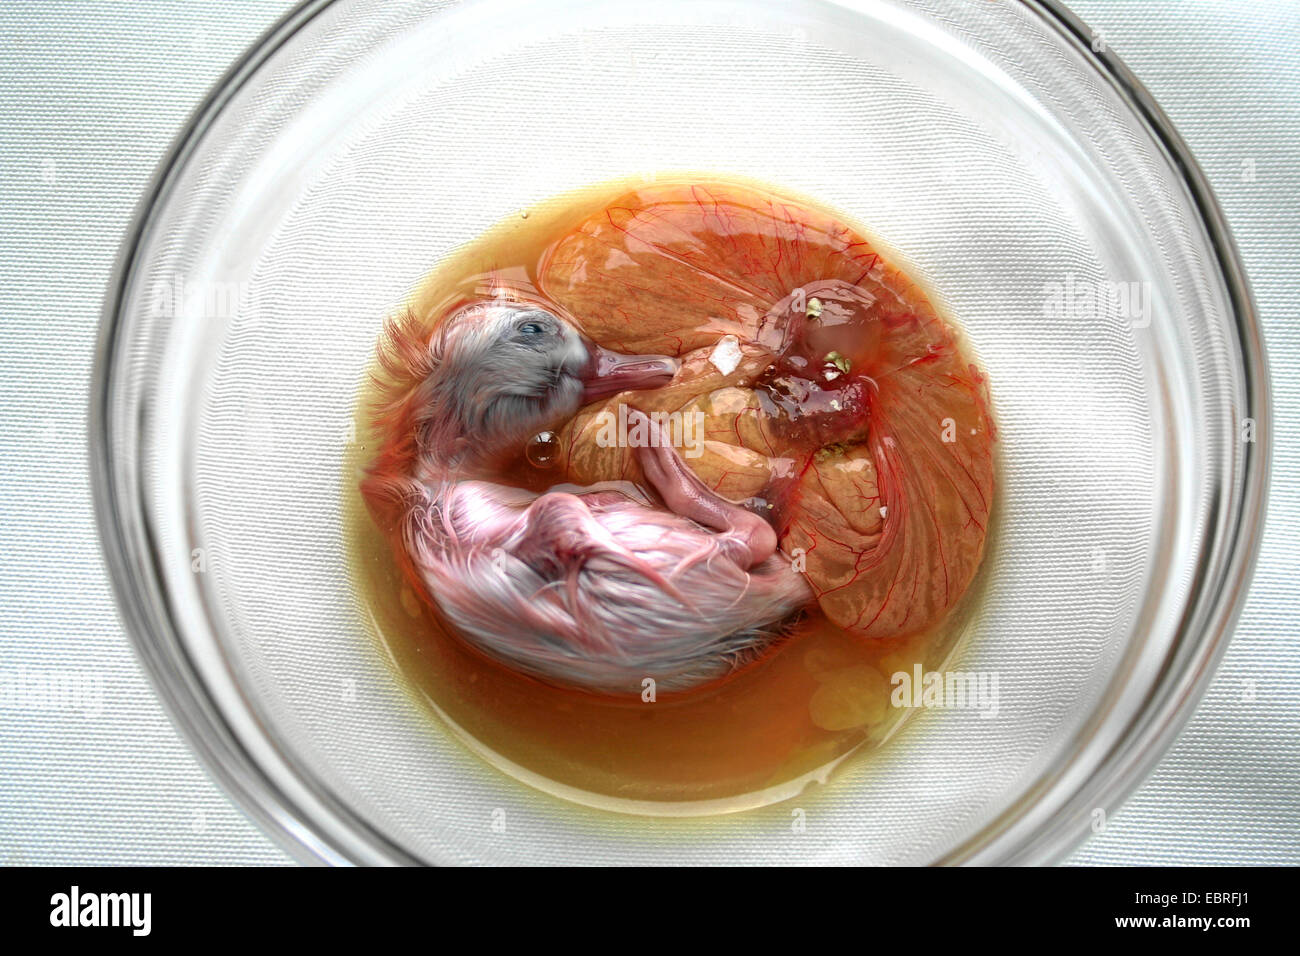 duck embryo from a fertilized egg called balut presented in a glass bowl, traditionally eaten as delicacy and supposed aphrodisiac in the Far East Stock Photo